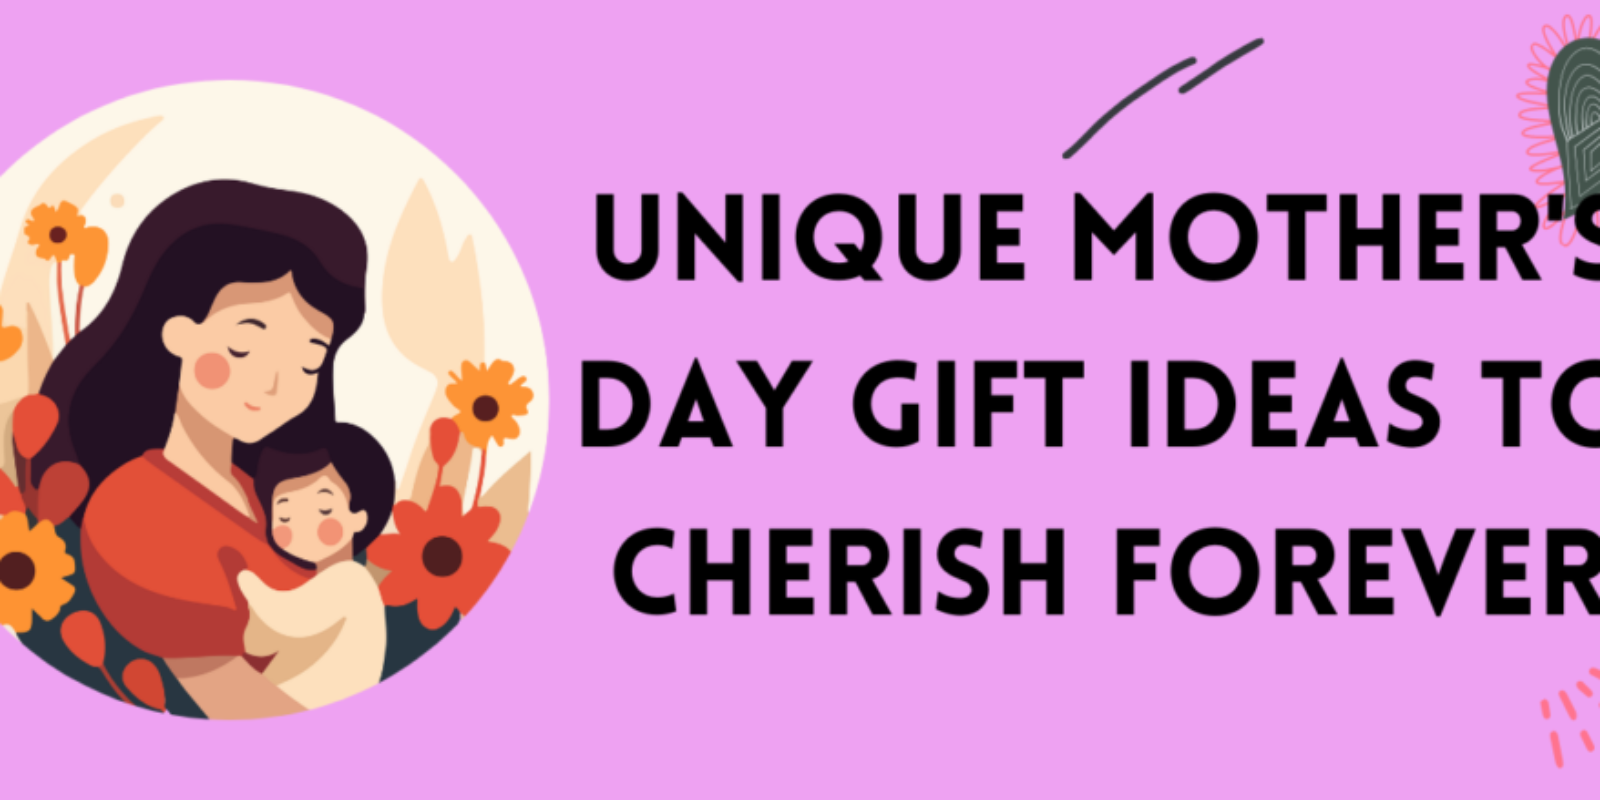 Unique Mother's Day Gift Ideas to Cherish Forever